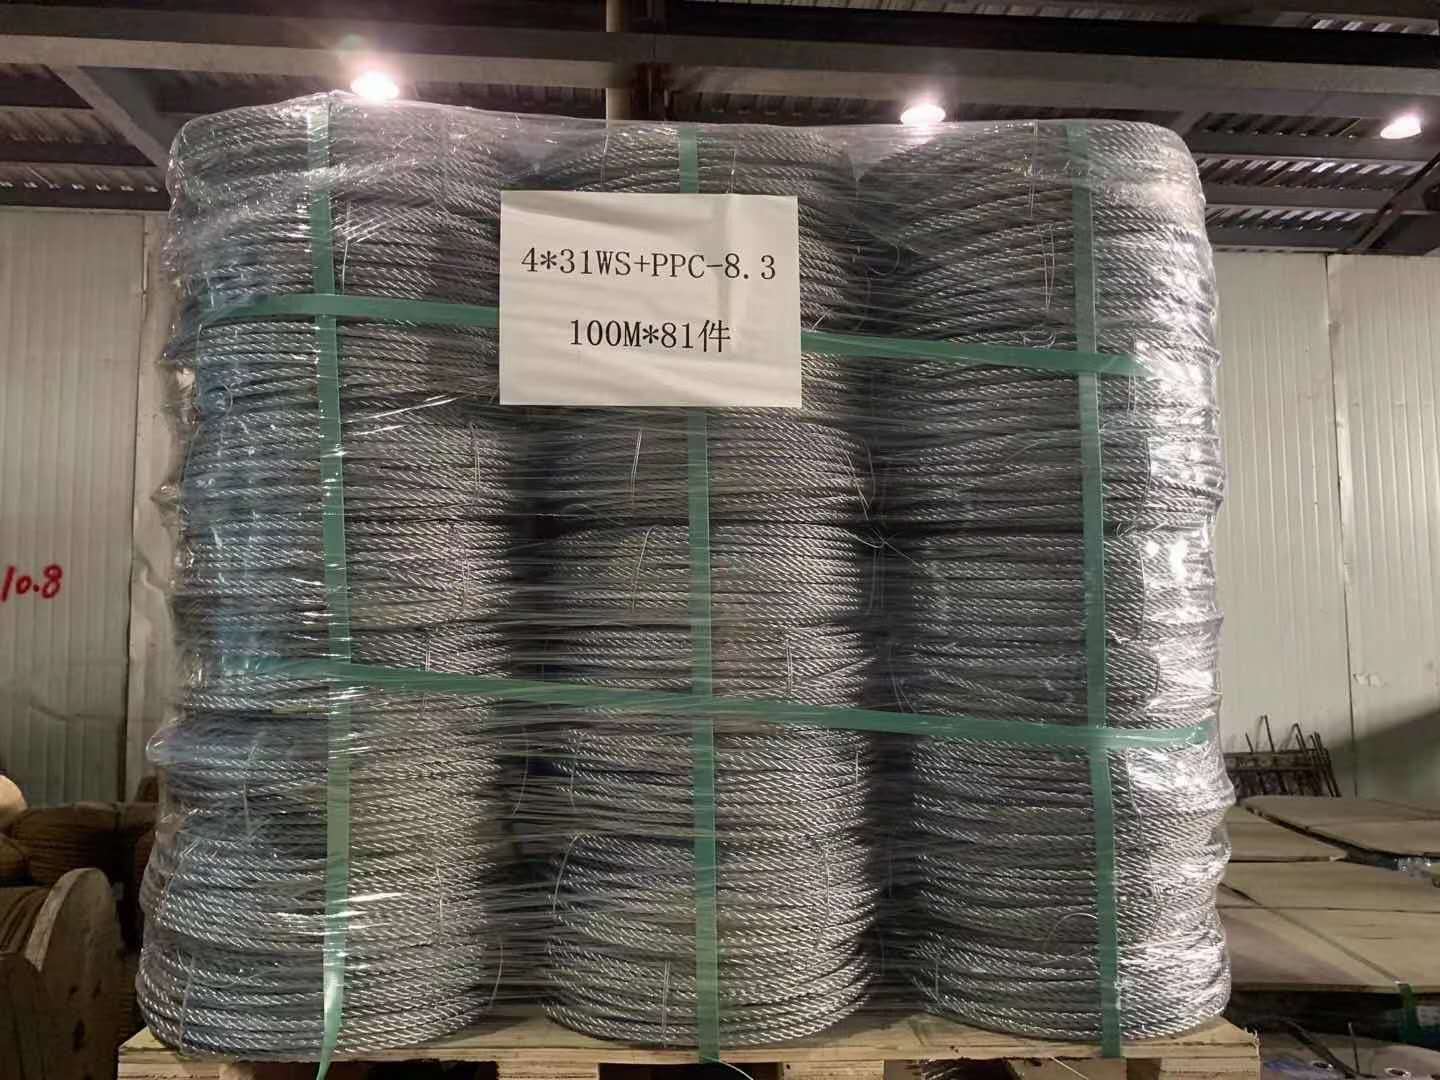 4*31ws+PPC/4X31WS+PPC 4x31 EIPS Galvanized Wire Rope 8.3mm 8.6mm For Electric Nacelle Machine